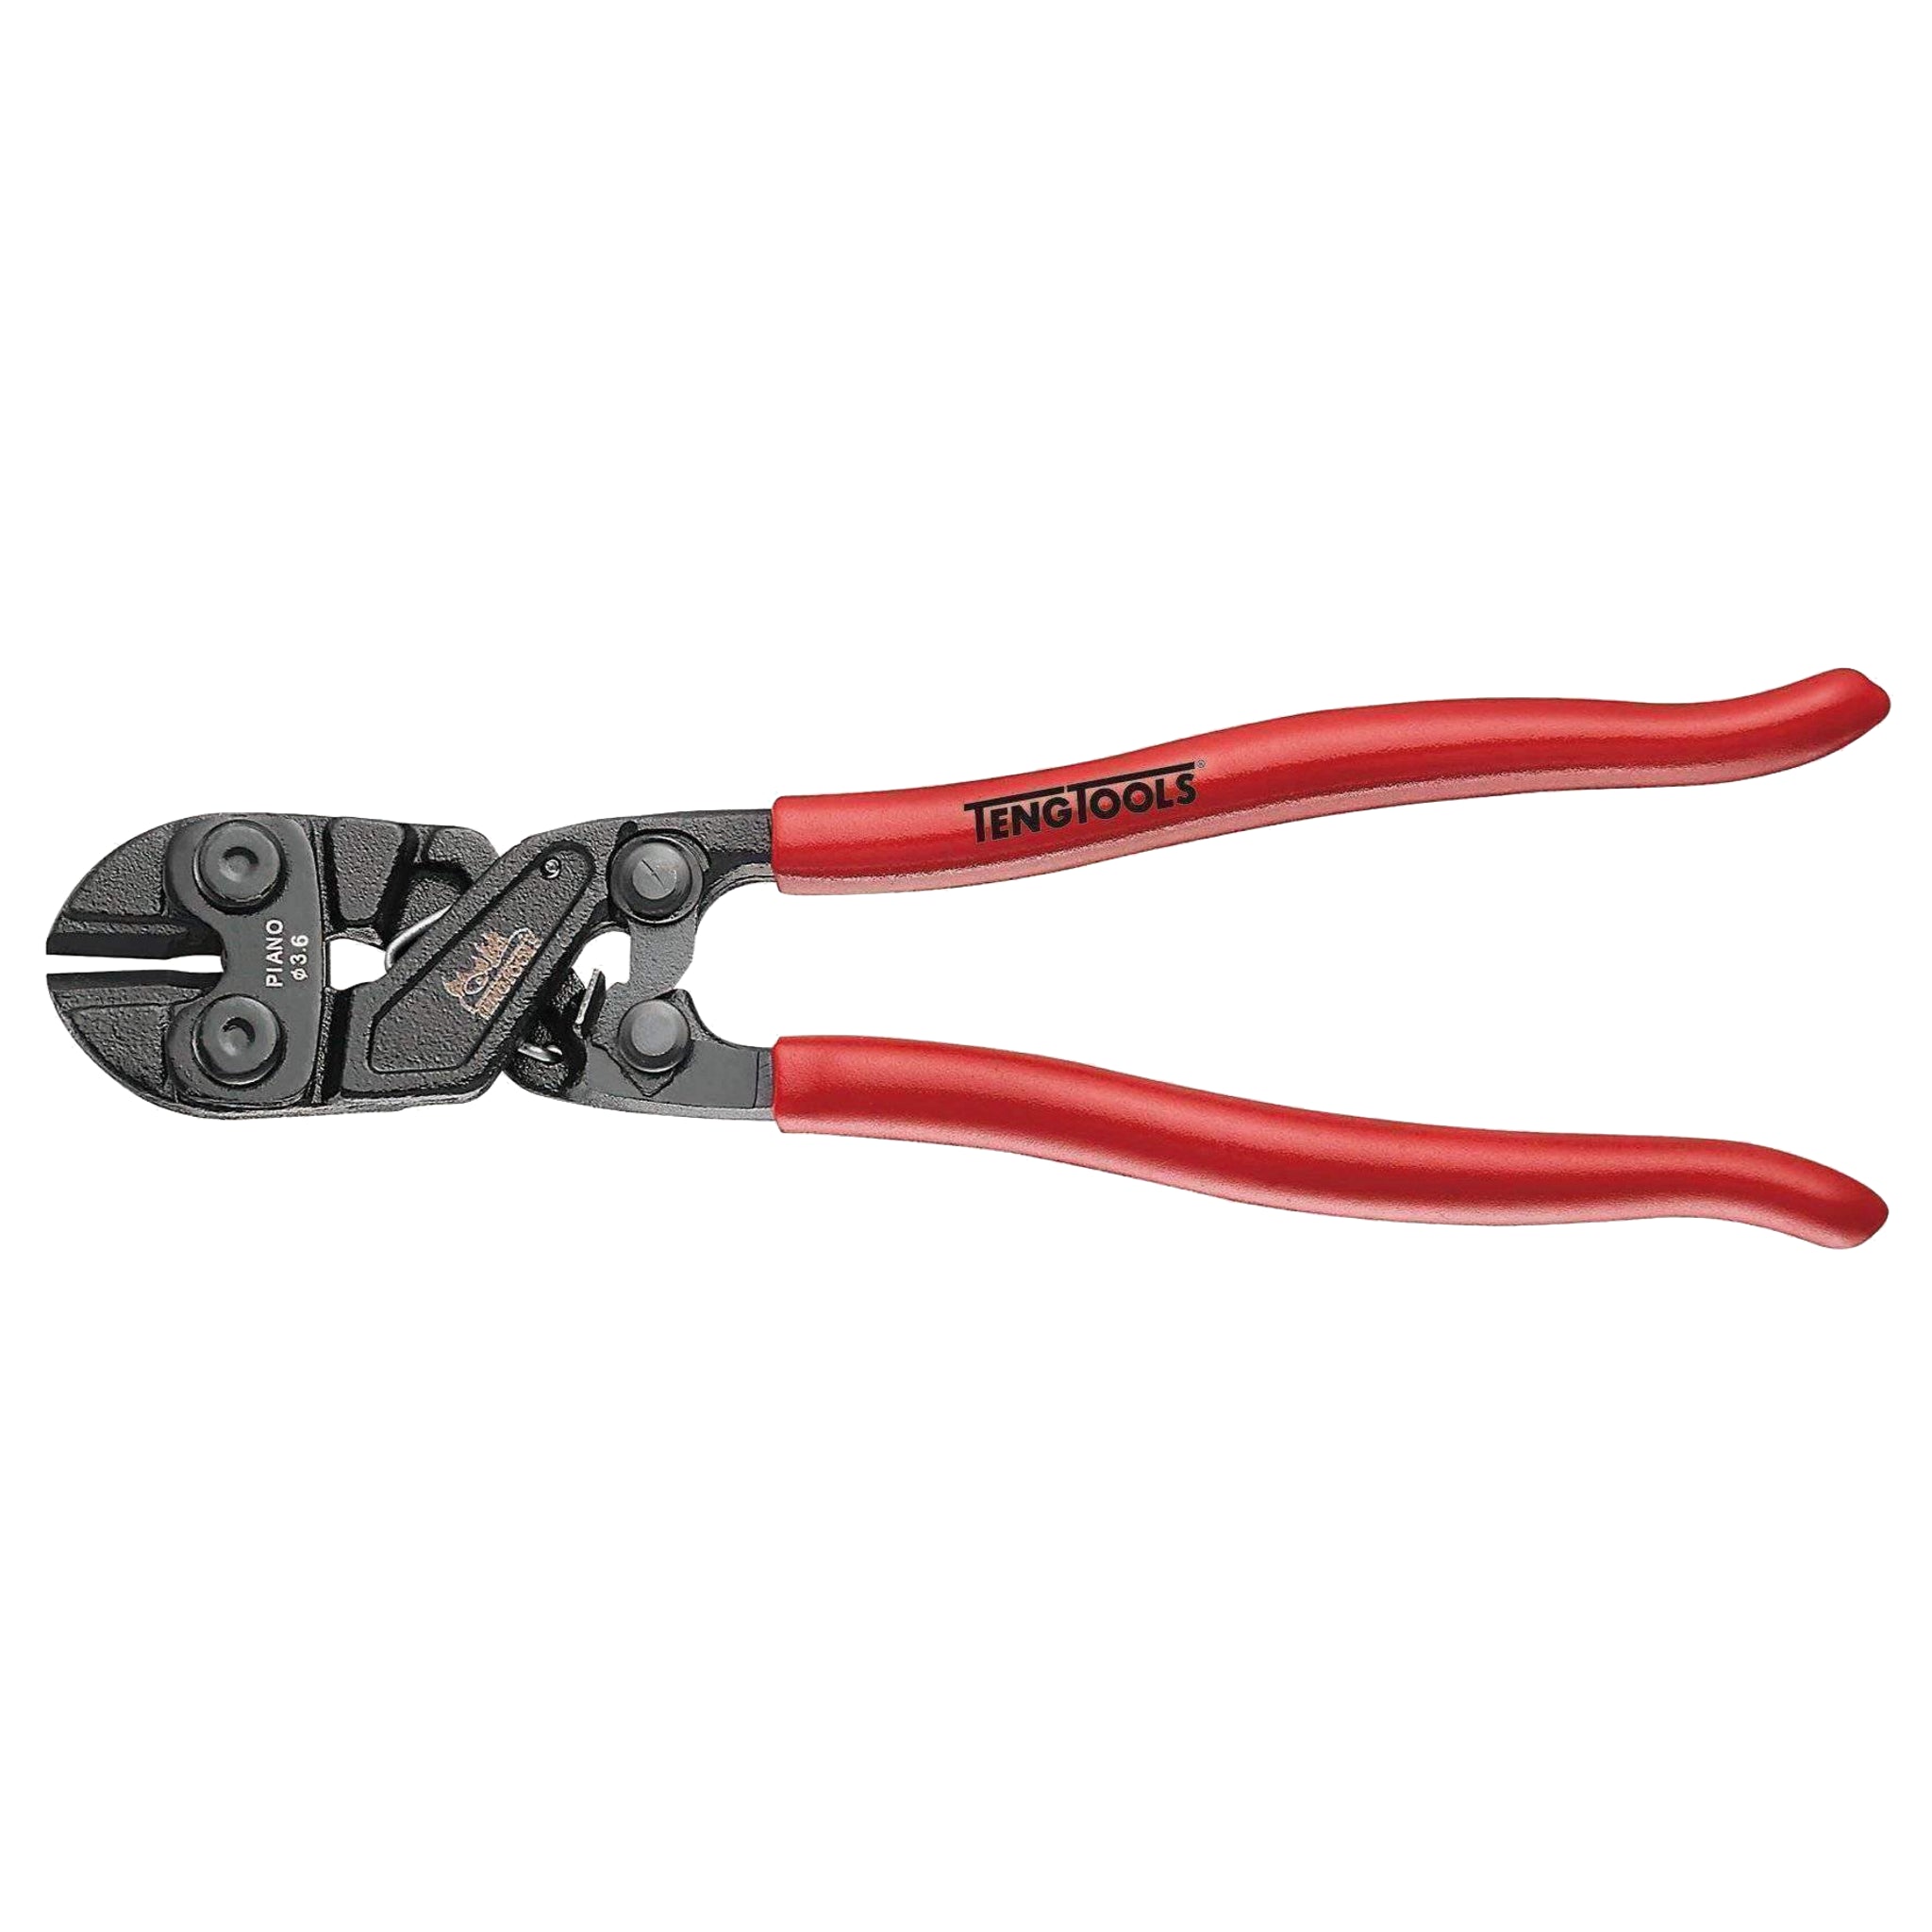 Teng Tools Bolt Cutters With Dipped Handle 8 To 36 Inches - 36 Inch